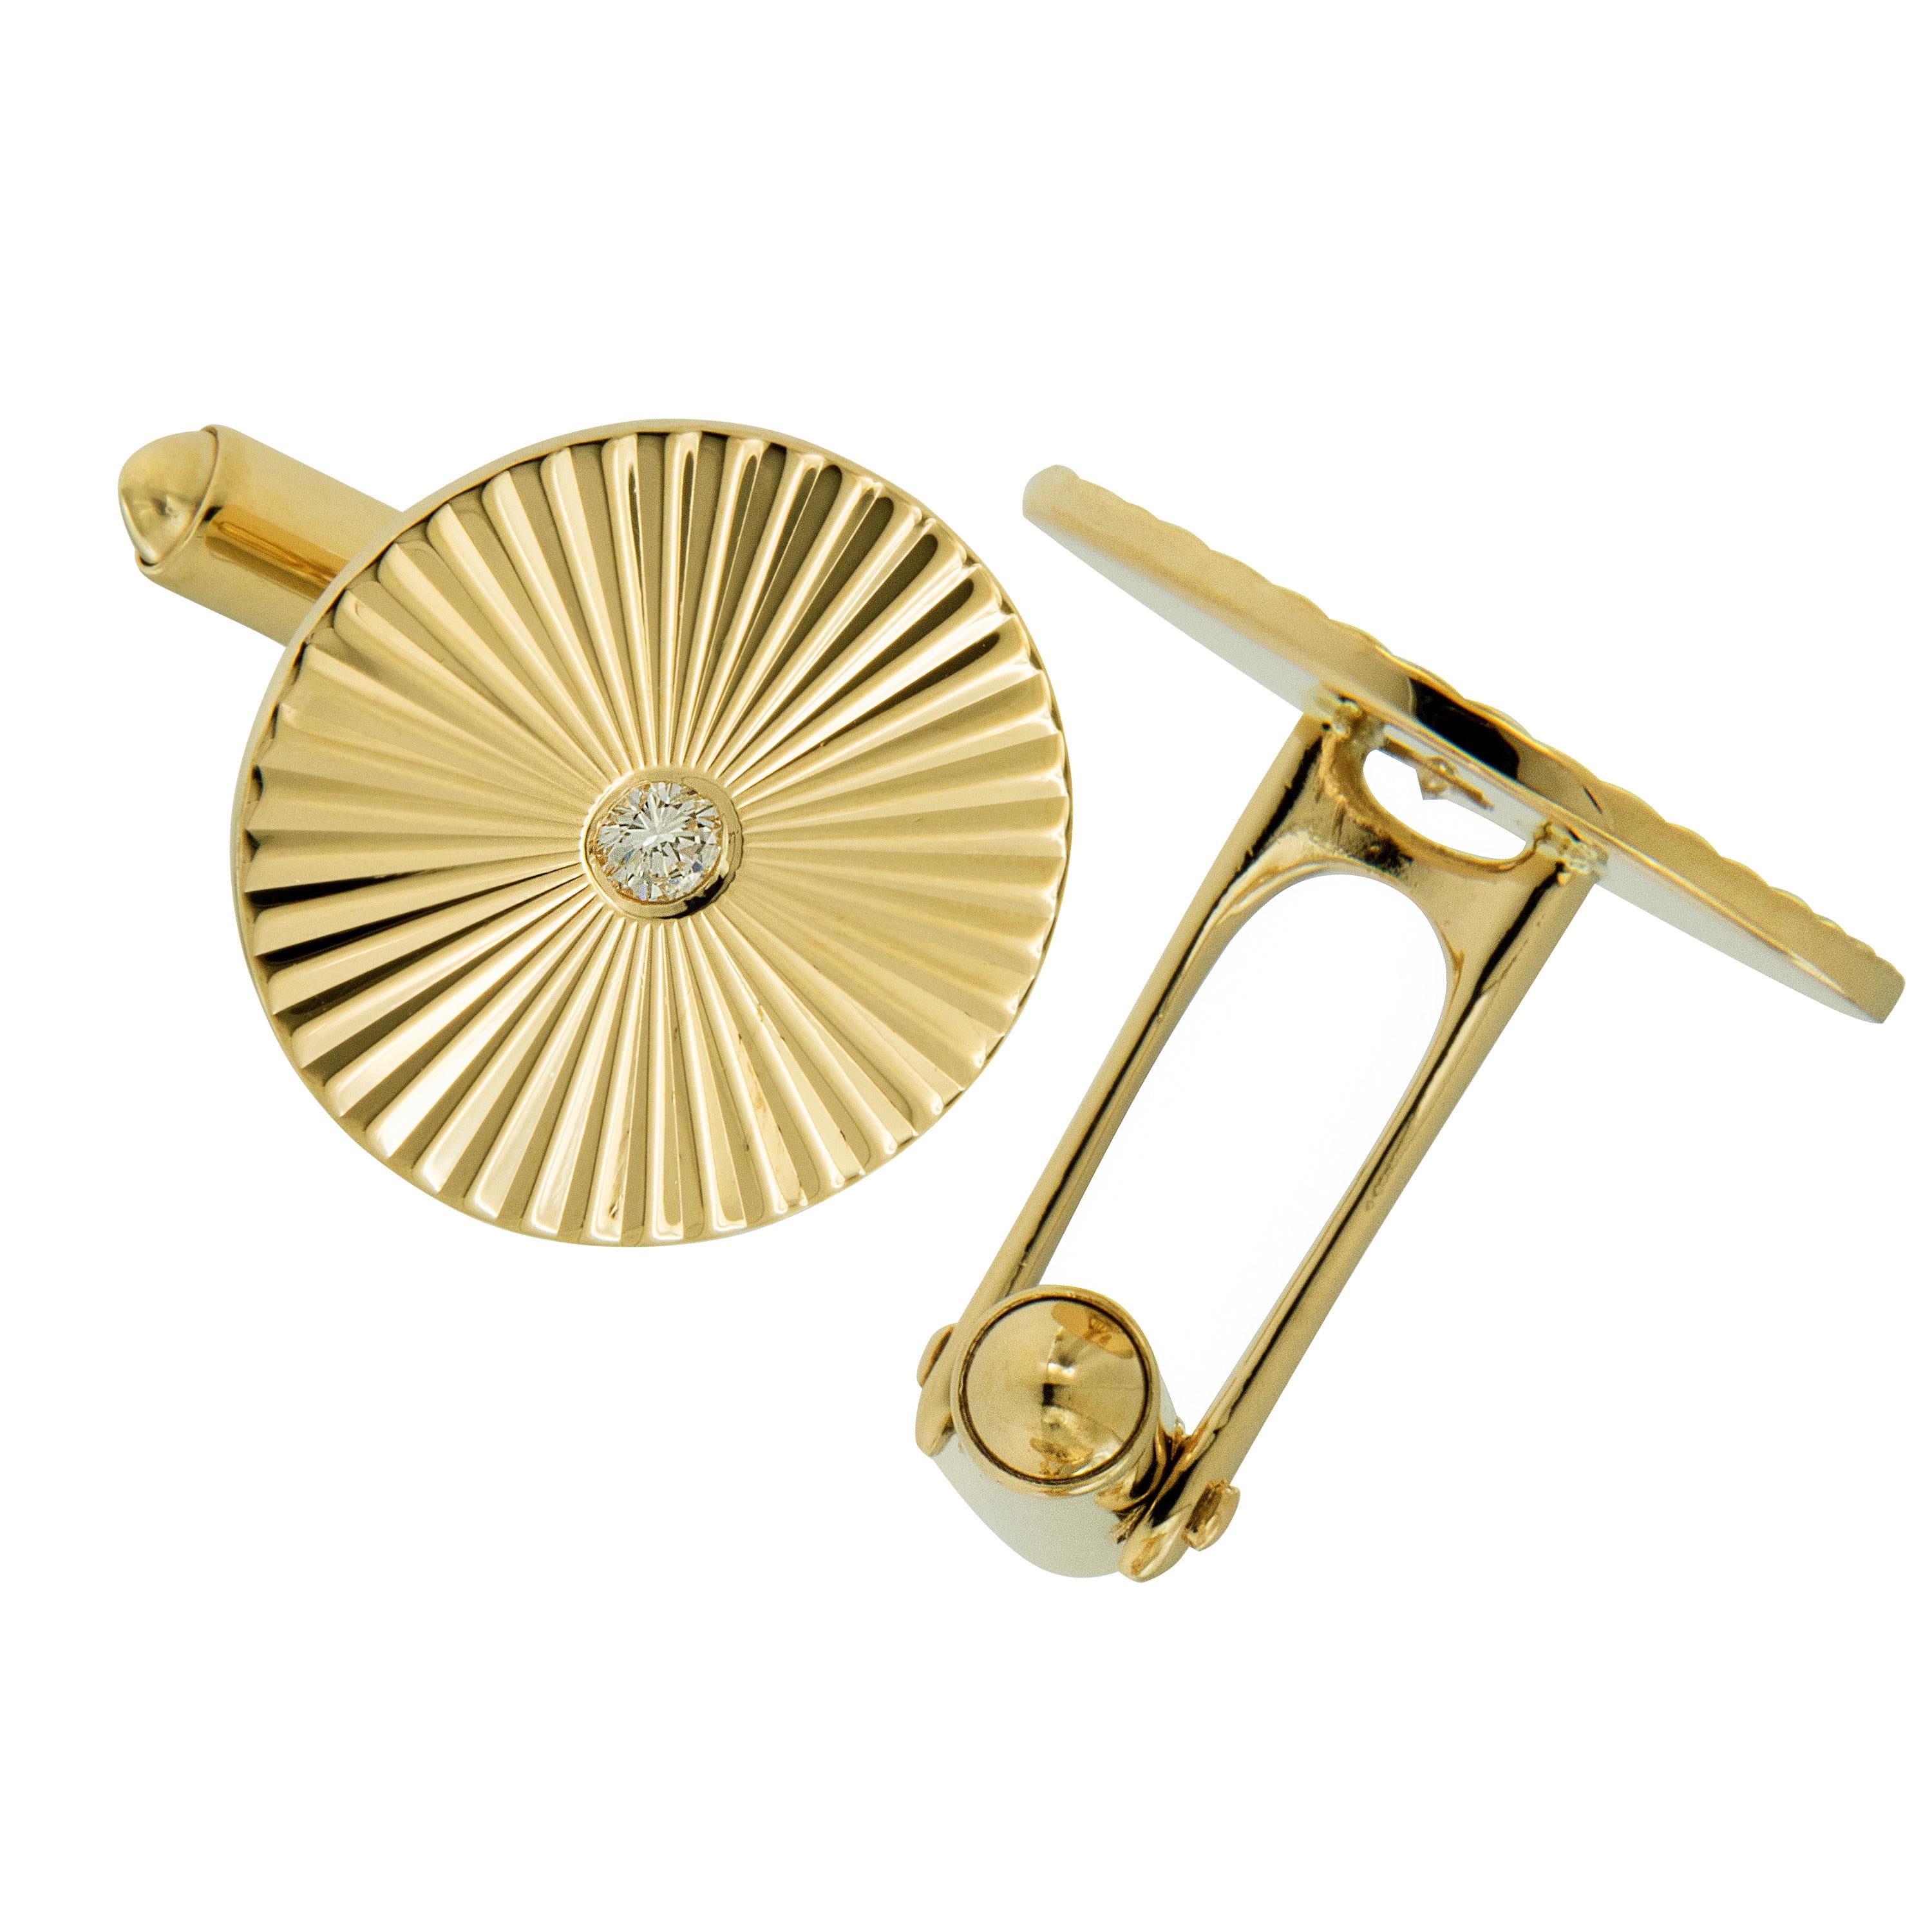 Classic cufflinks for the sharp dressed man! Crafted in 14 karat yellow gold in fluted fashion & timeless round shape, these staples are topped off with one diamond. Sturdy cufflink components for optimal placement on your cuff.
14KYG
Diamond= 0.22